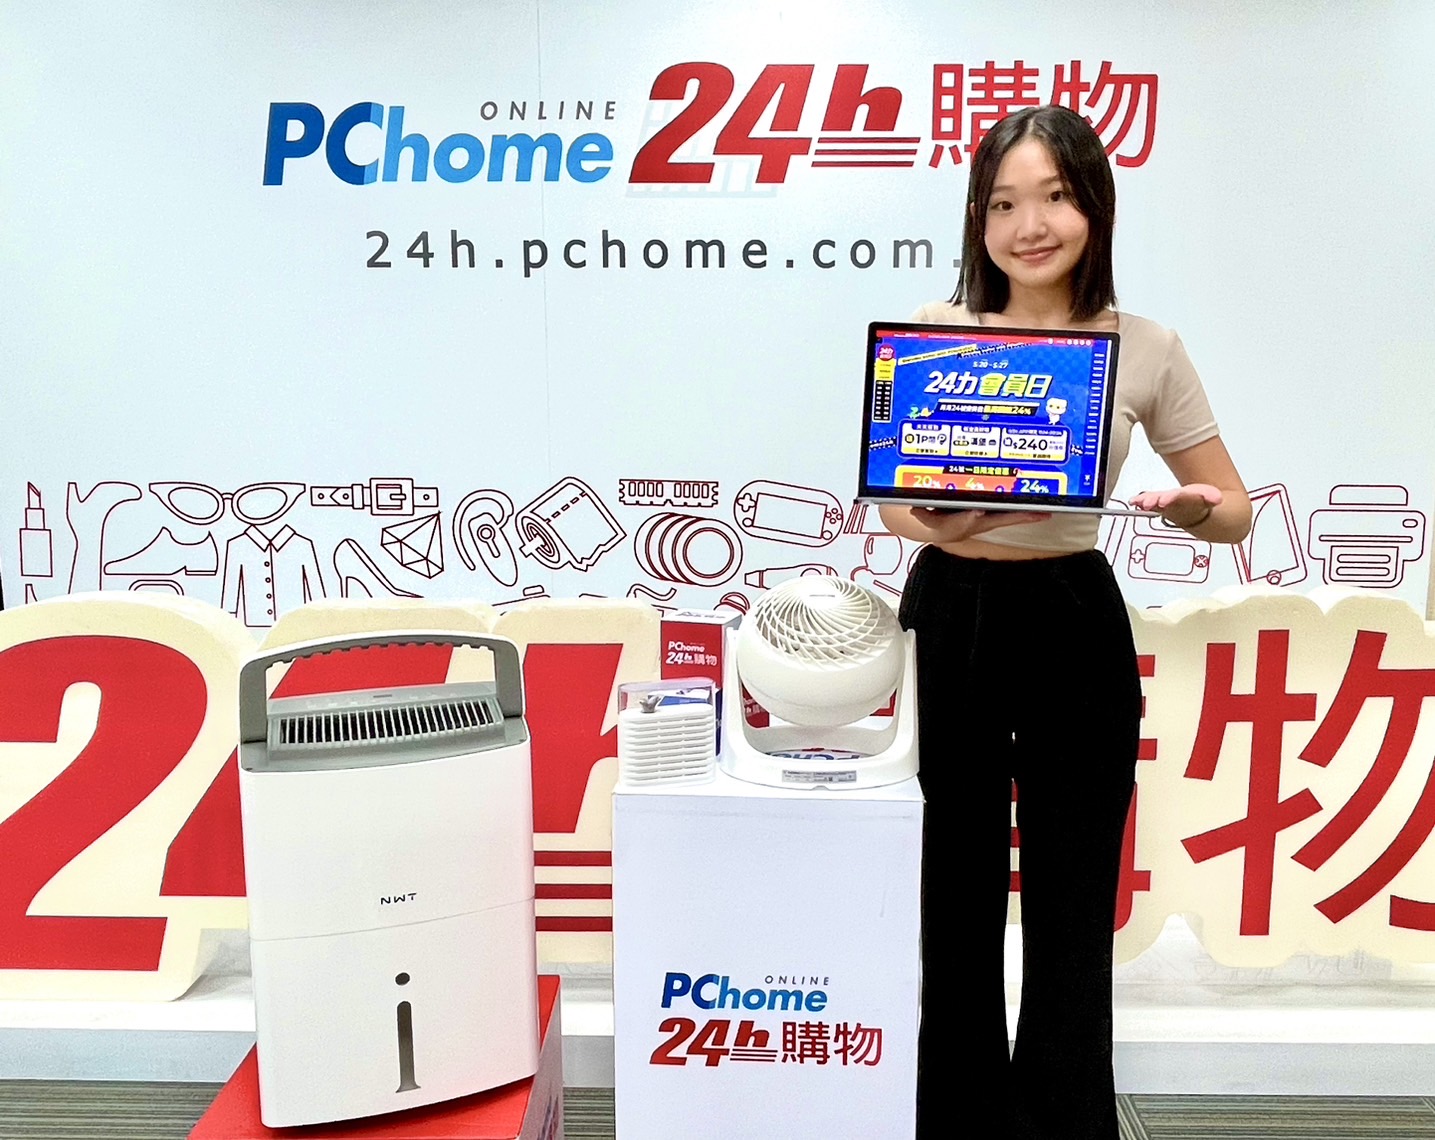 Brace for the Plum Rain Season; PChome 24h Shopping Sees Over 50% YoY Increase in Dehumidifiers Sales; 6-10 Liter Dehumidifiers Are Bestsellers